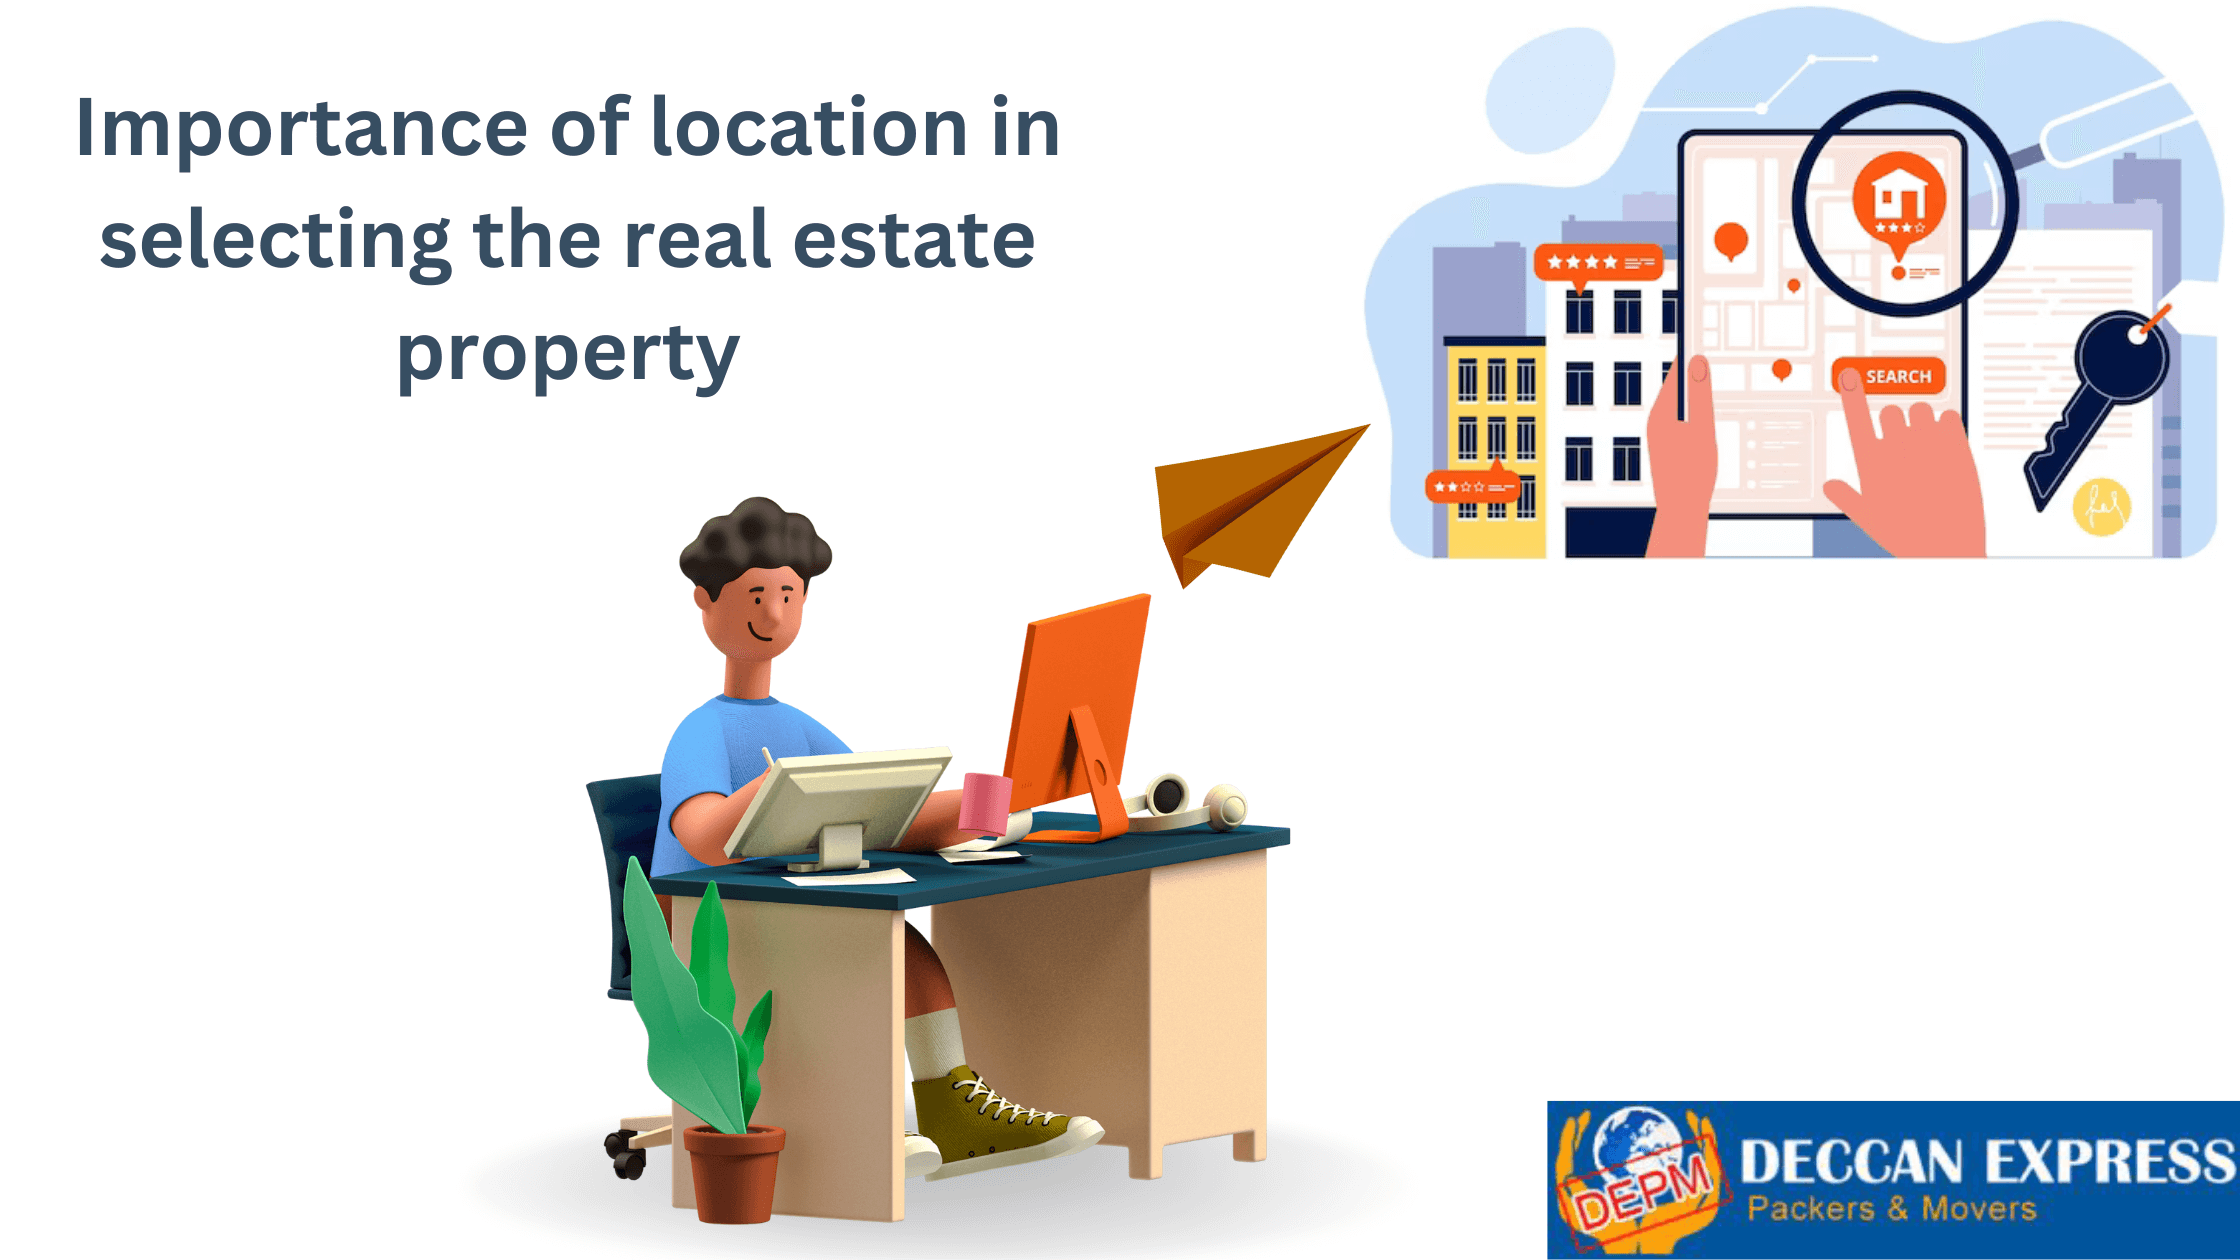 Importance of location in selecting the real estate property